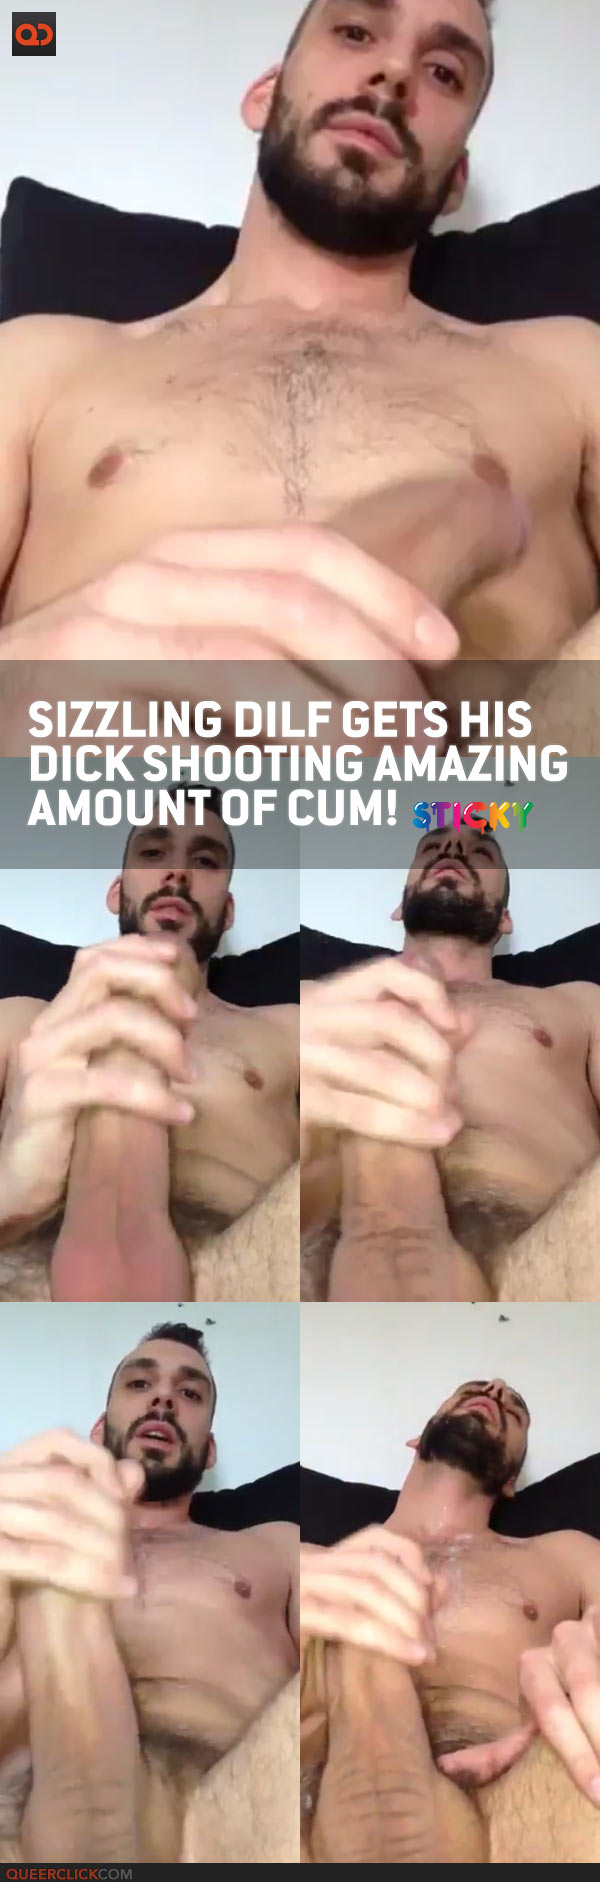 Sizzling DILF Gets His Dick Shooting Amazing Amount Of Cum!